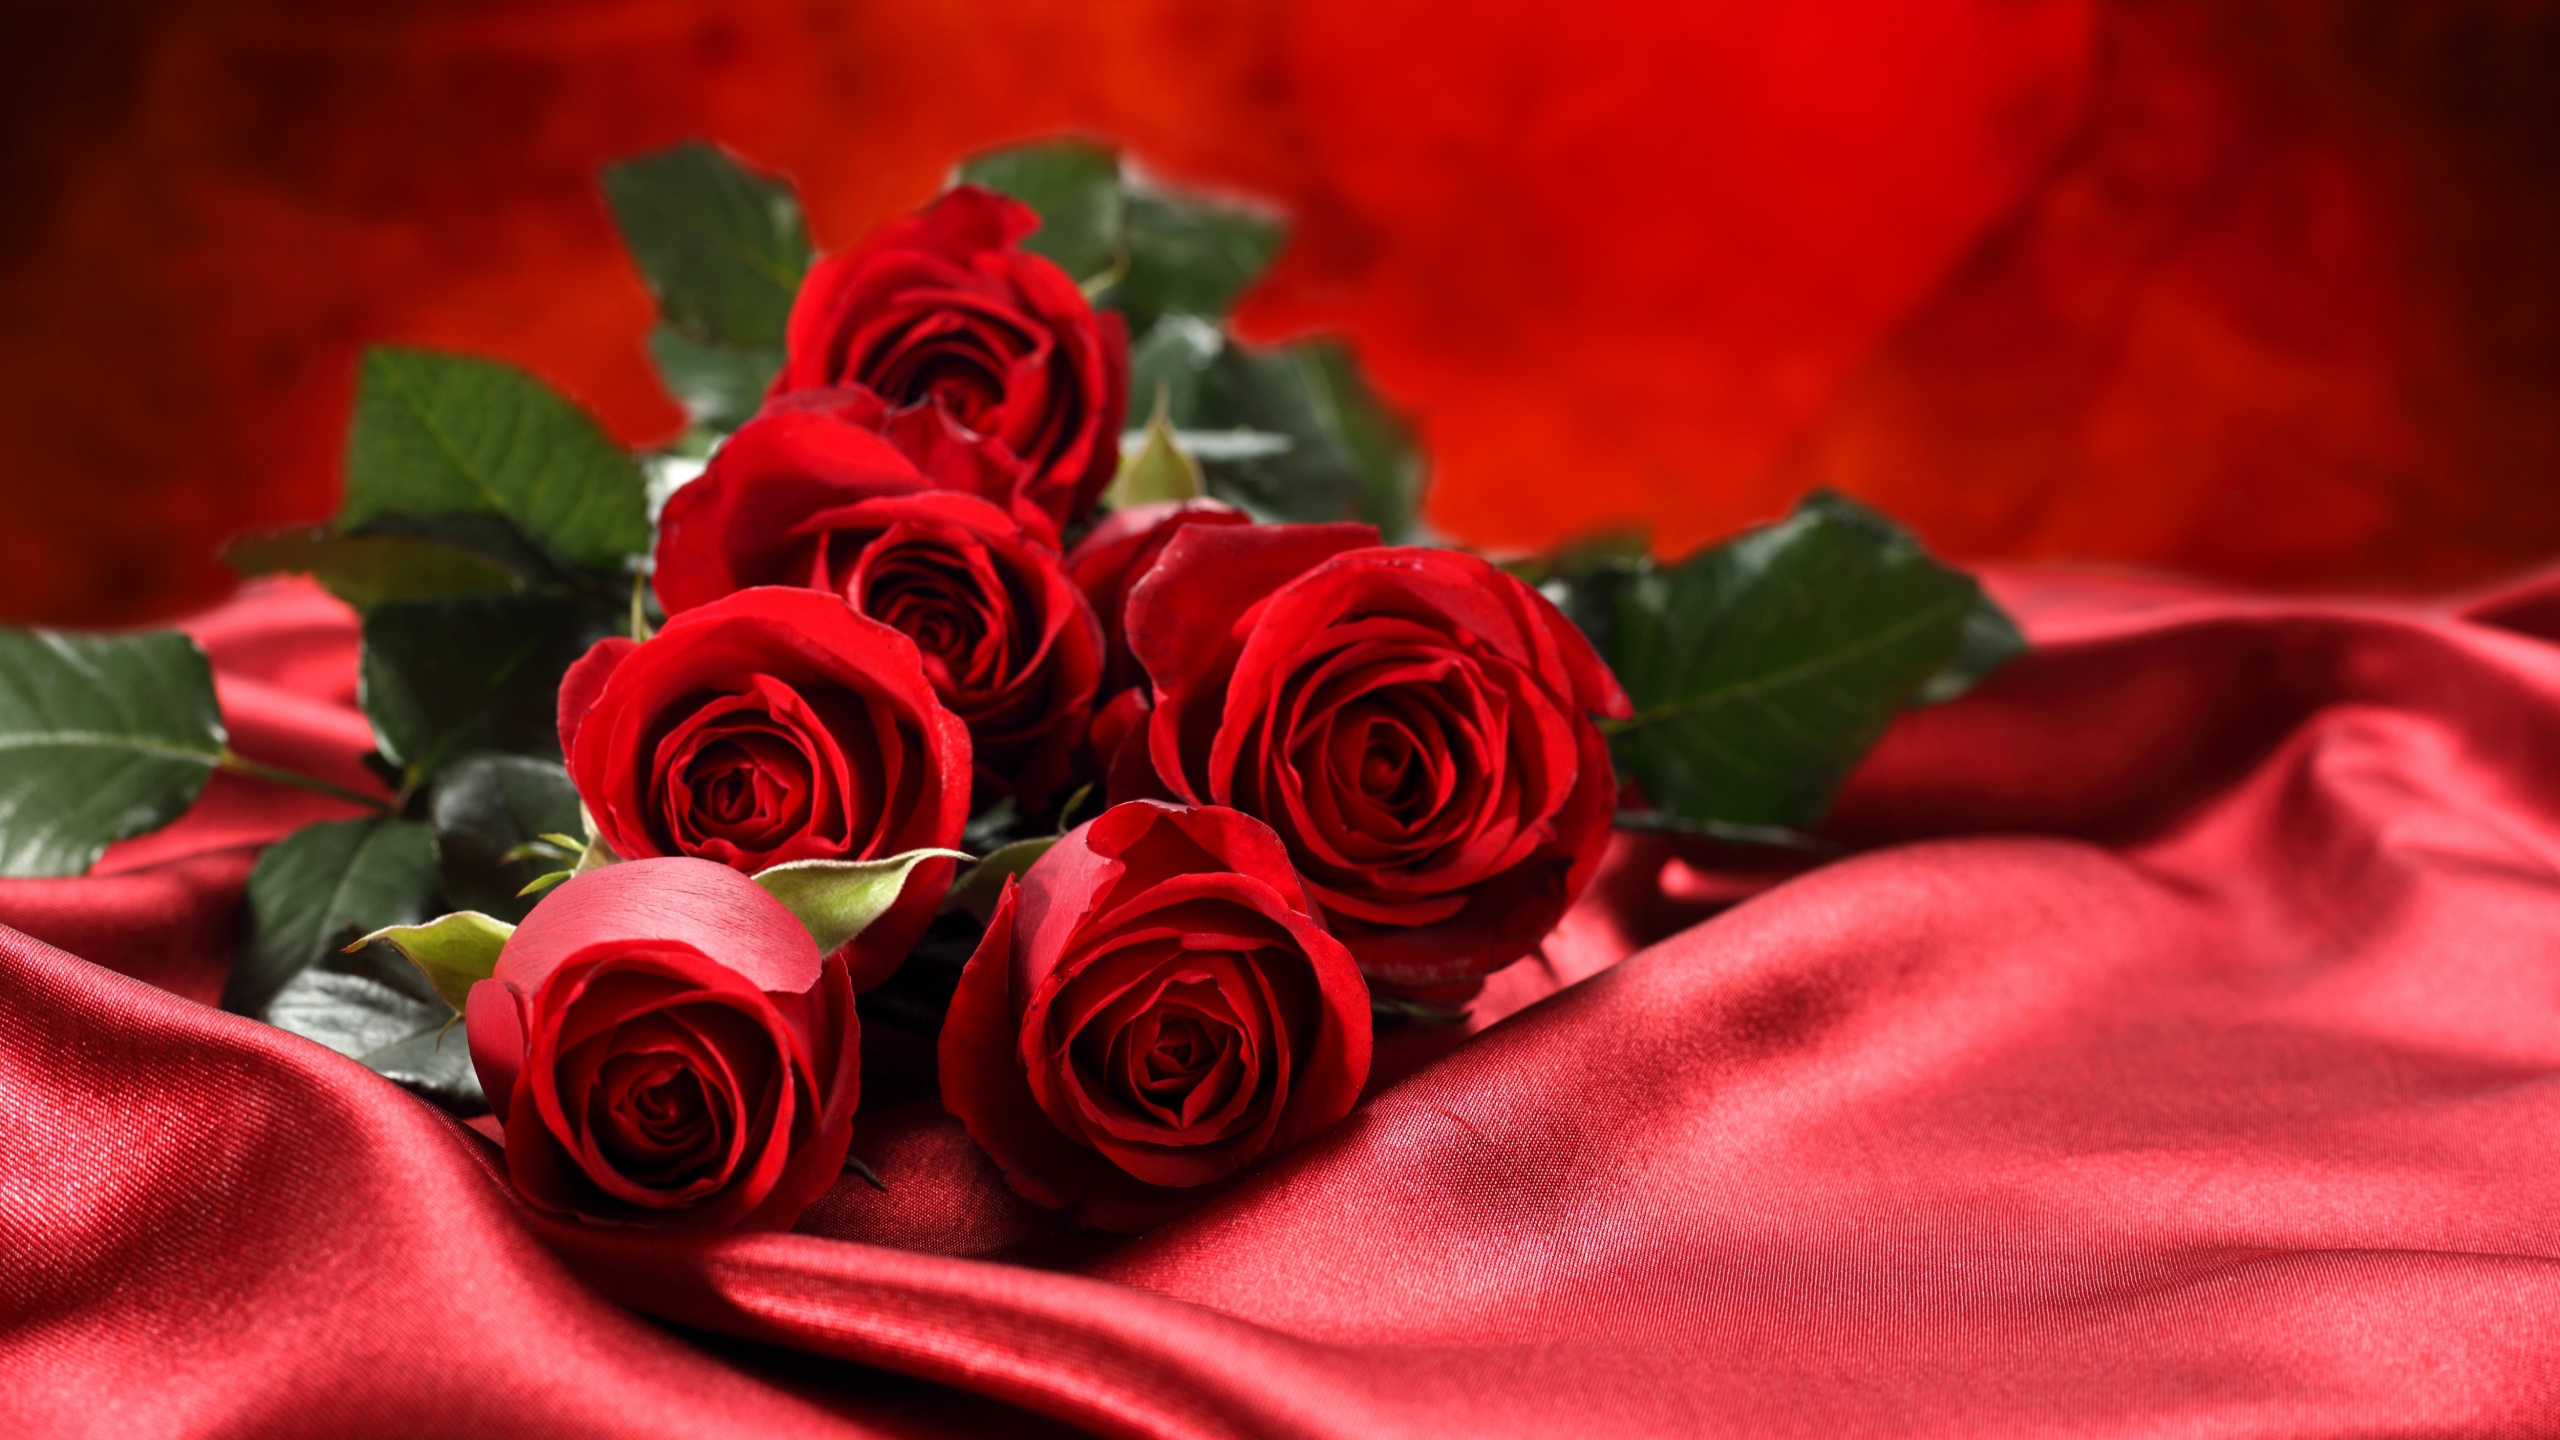 Red Roses on Red Textile. Wallpaper in 2560x1440 Resolution